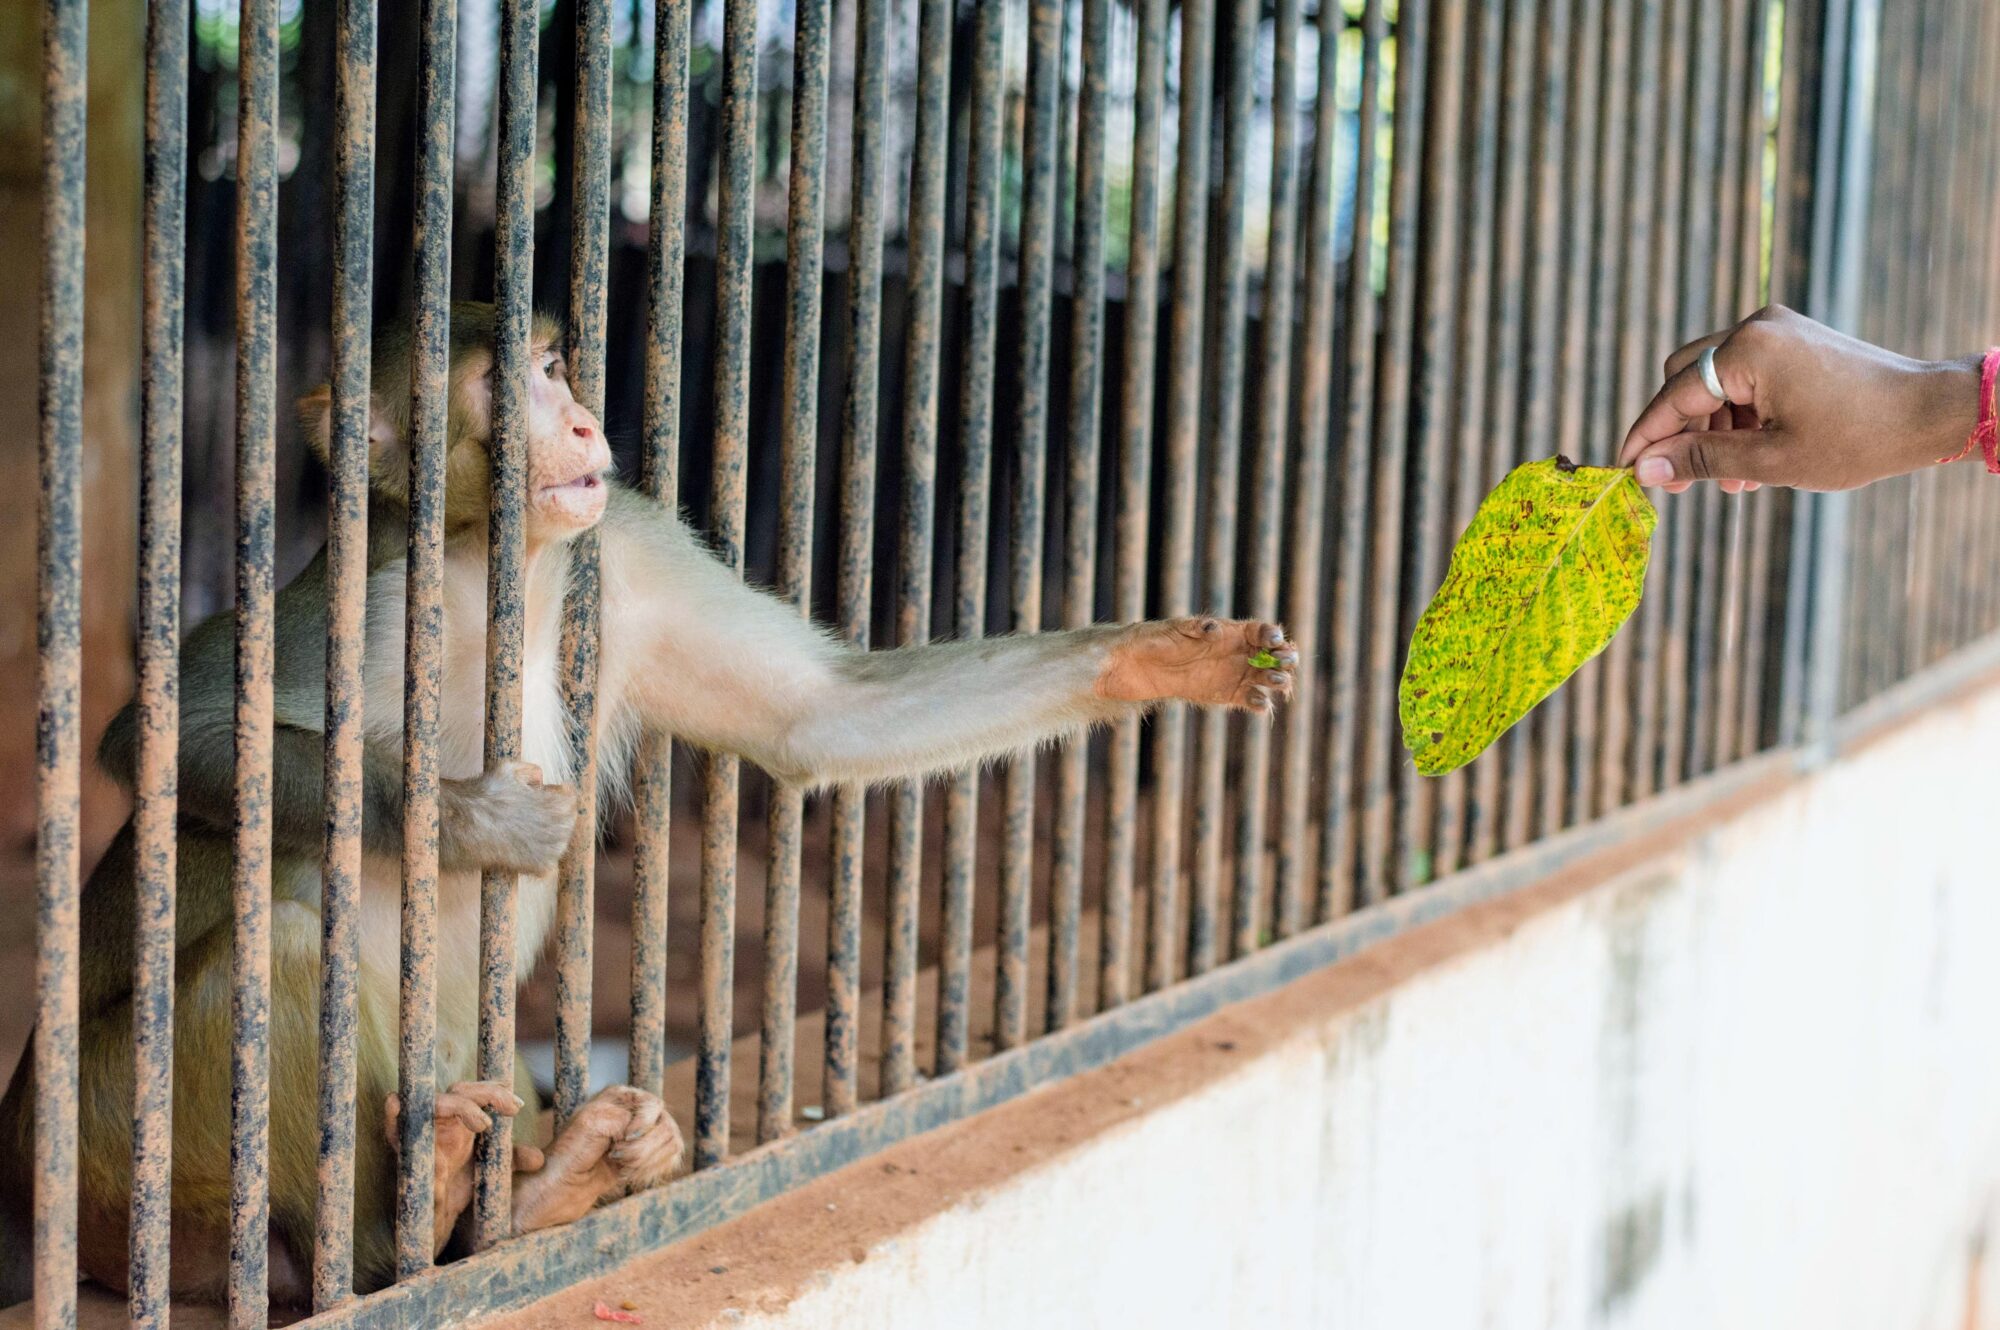 Visitor offering a leaf to a monkey in a zoo